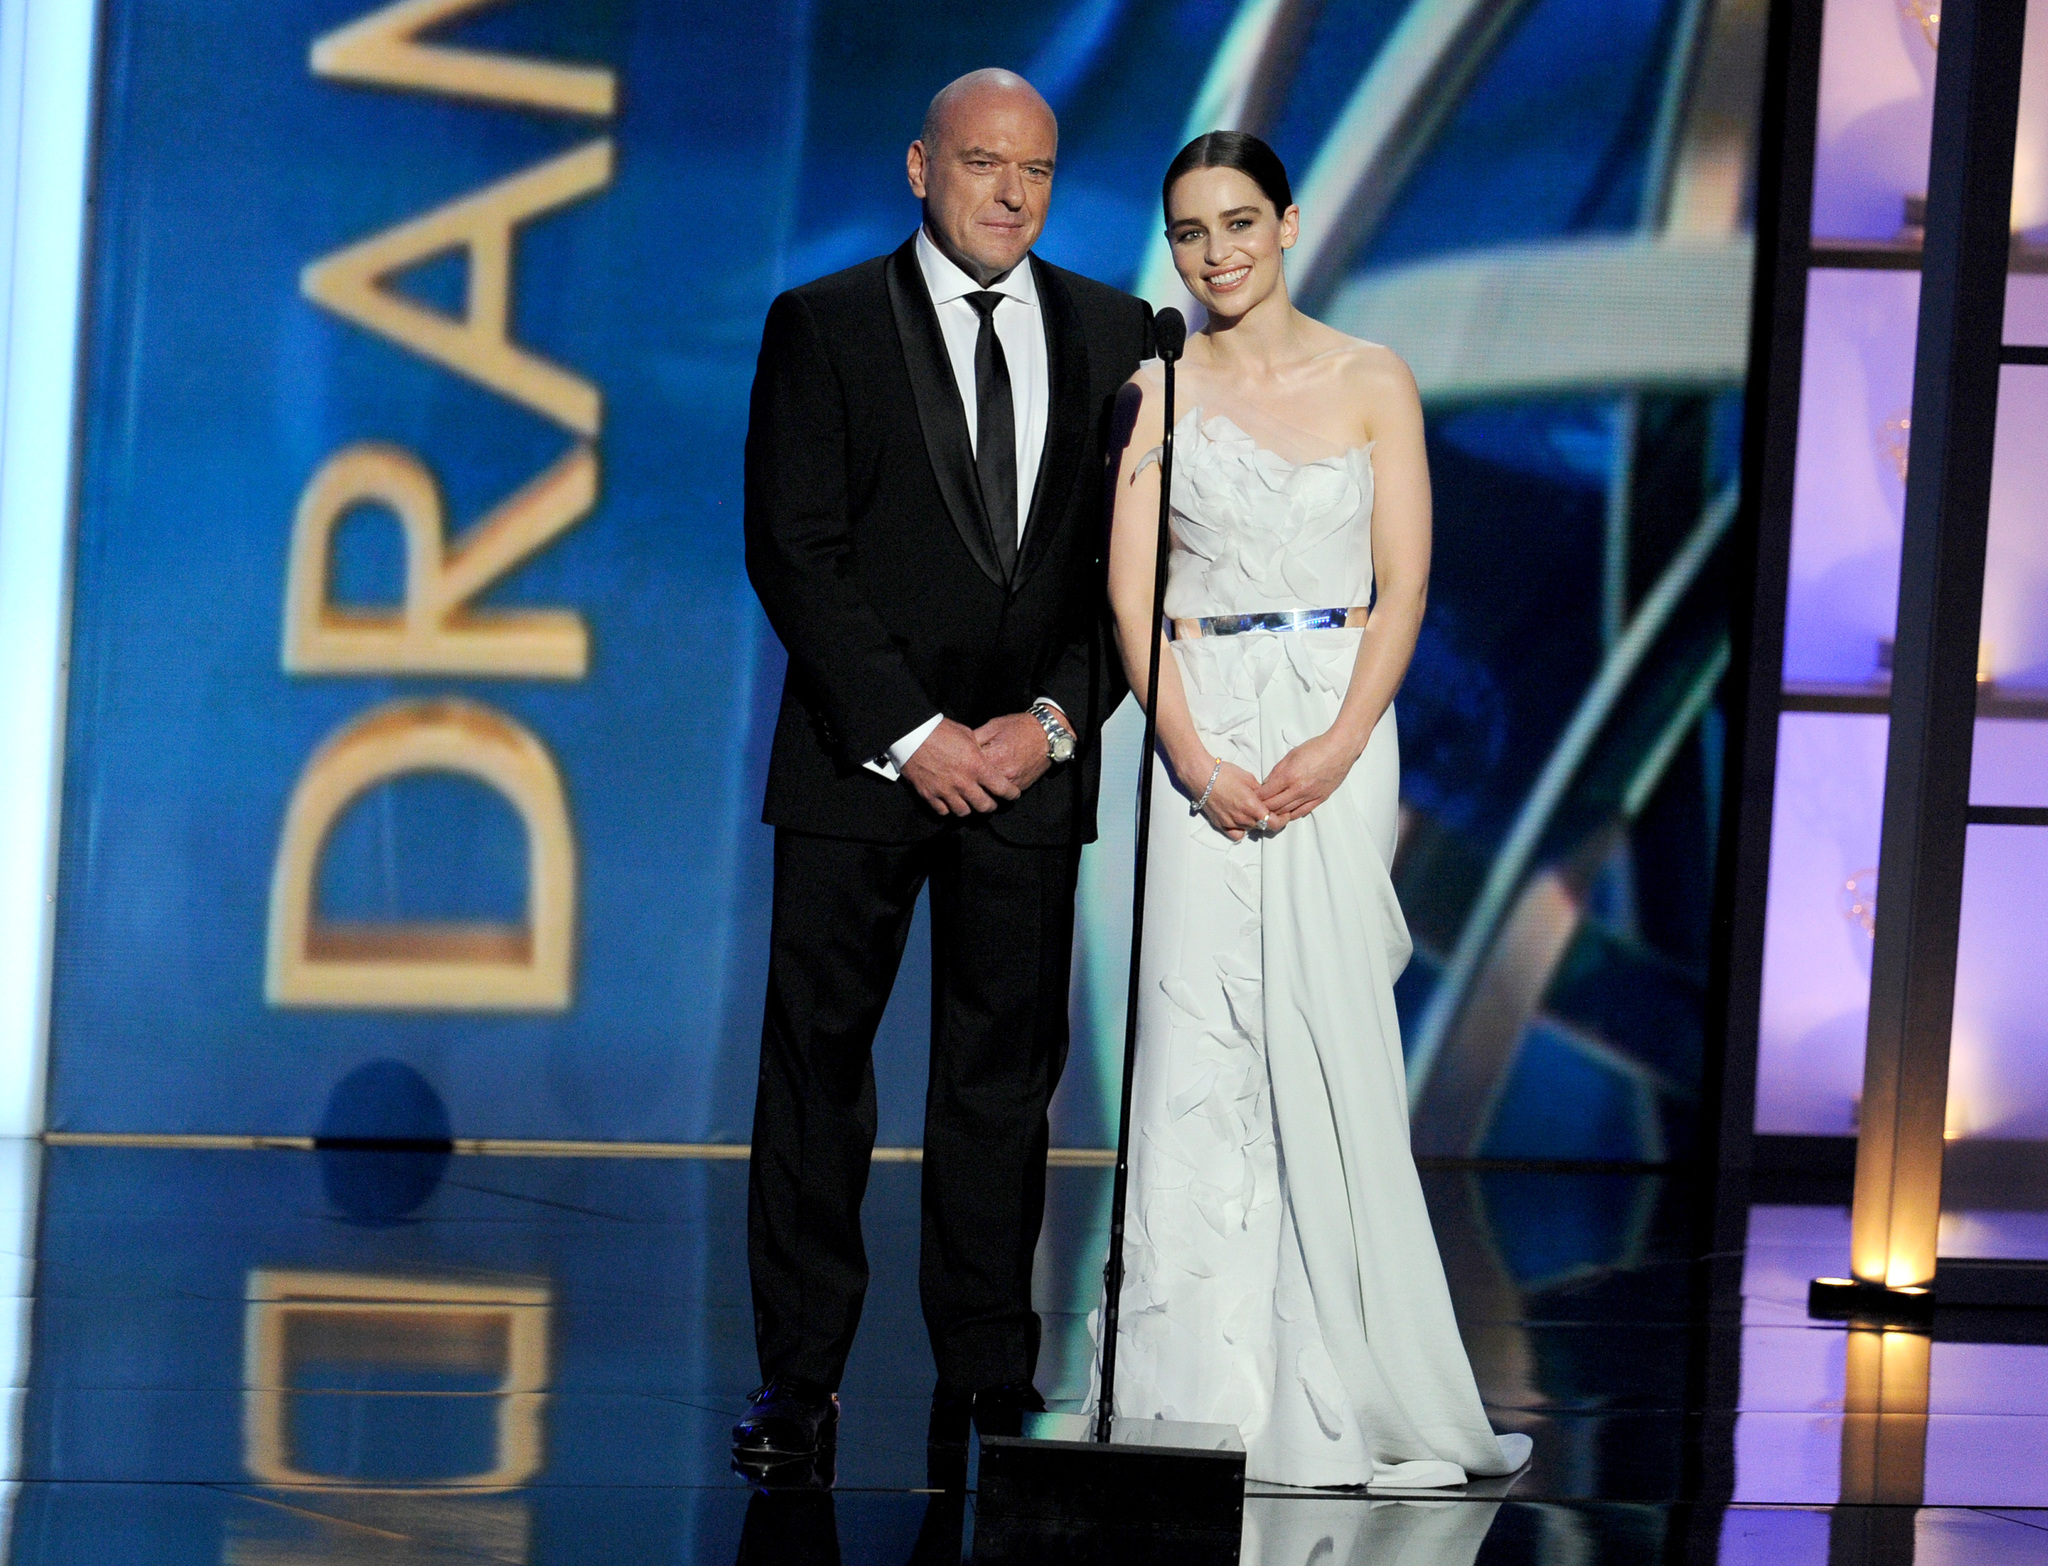 Dean Norris and Emilia Clarke at event of The 65th Primetime Emmy Awards (2013)